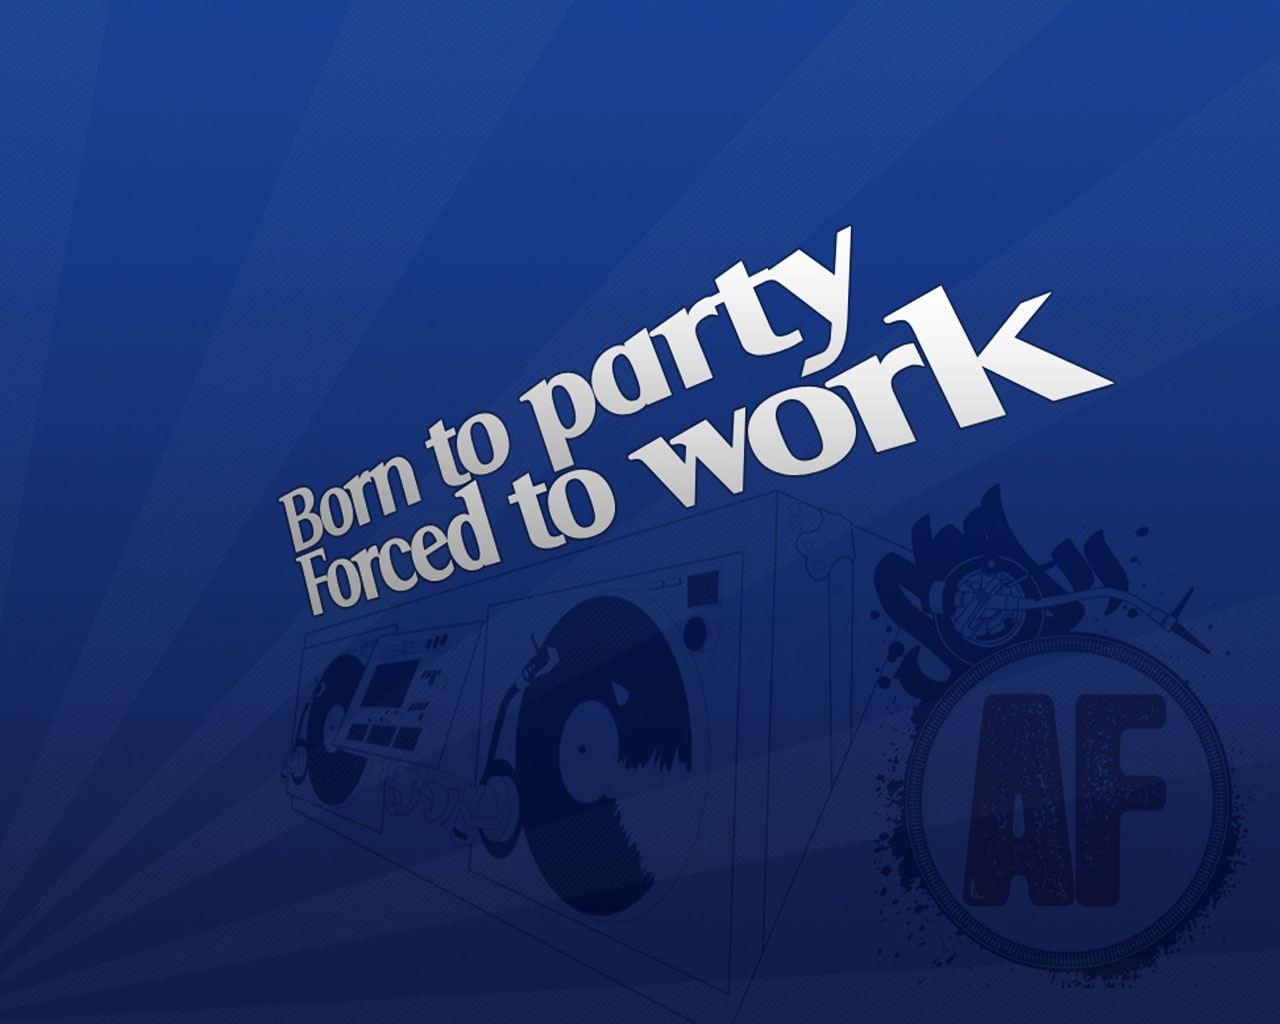  Born To Party Forced To Work wallpaper music and dance wallpapers 1280x1024